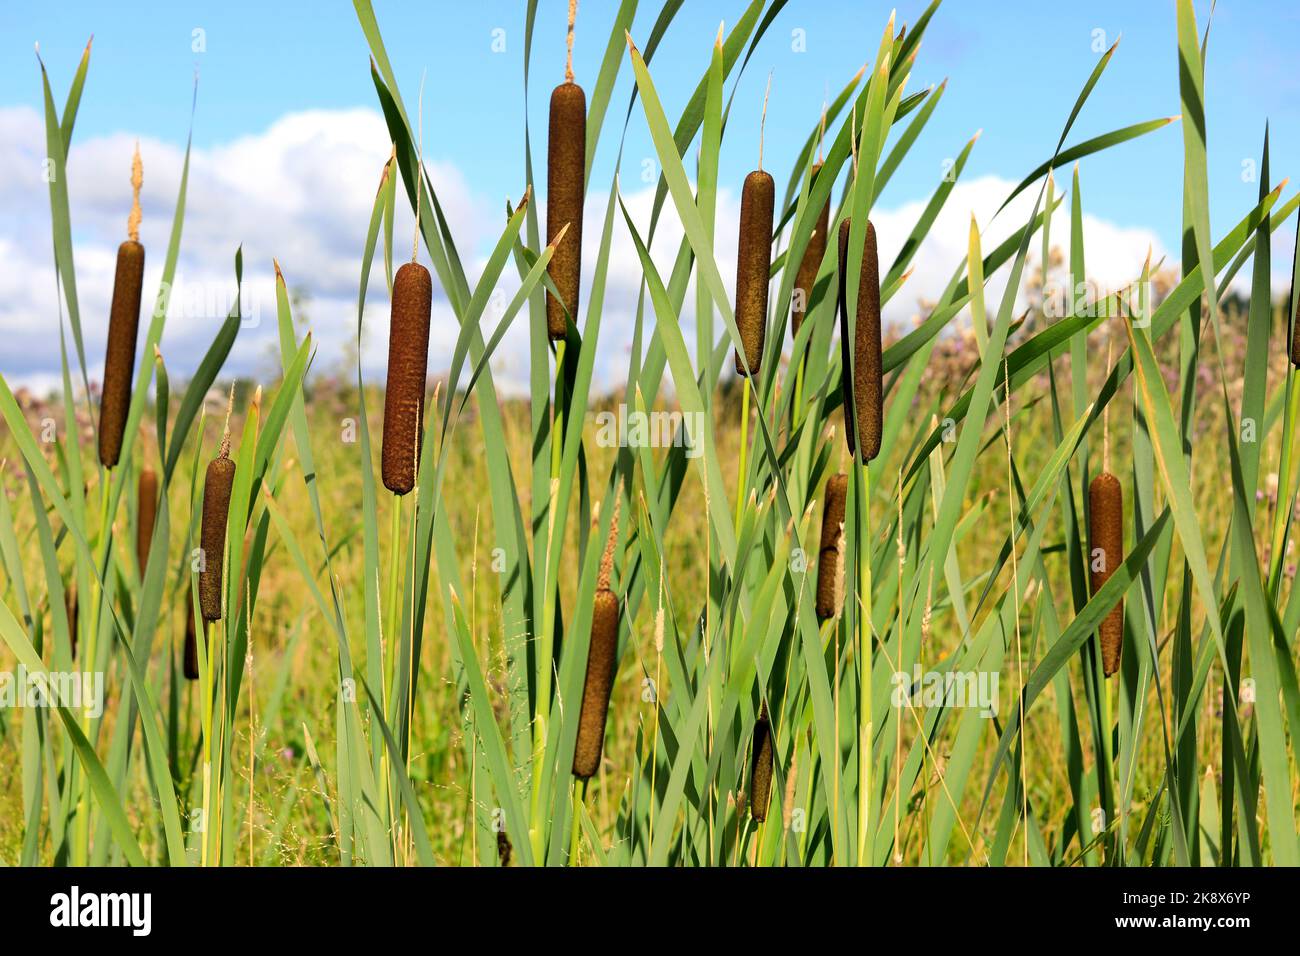 Typha latifolia, also called Bulrush or Common Cattail growing in a trench. Typha fiber has a potential to be novel, sustainable textile fiber. Stock Photo